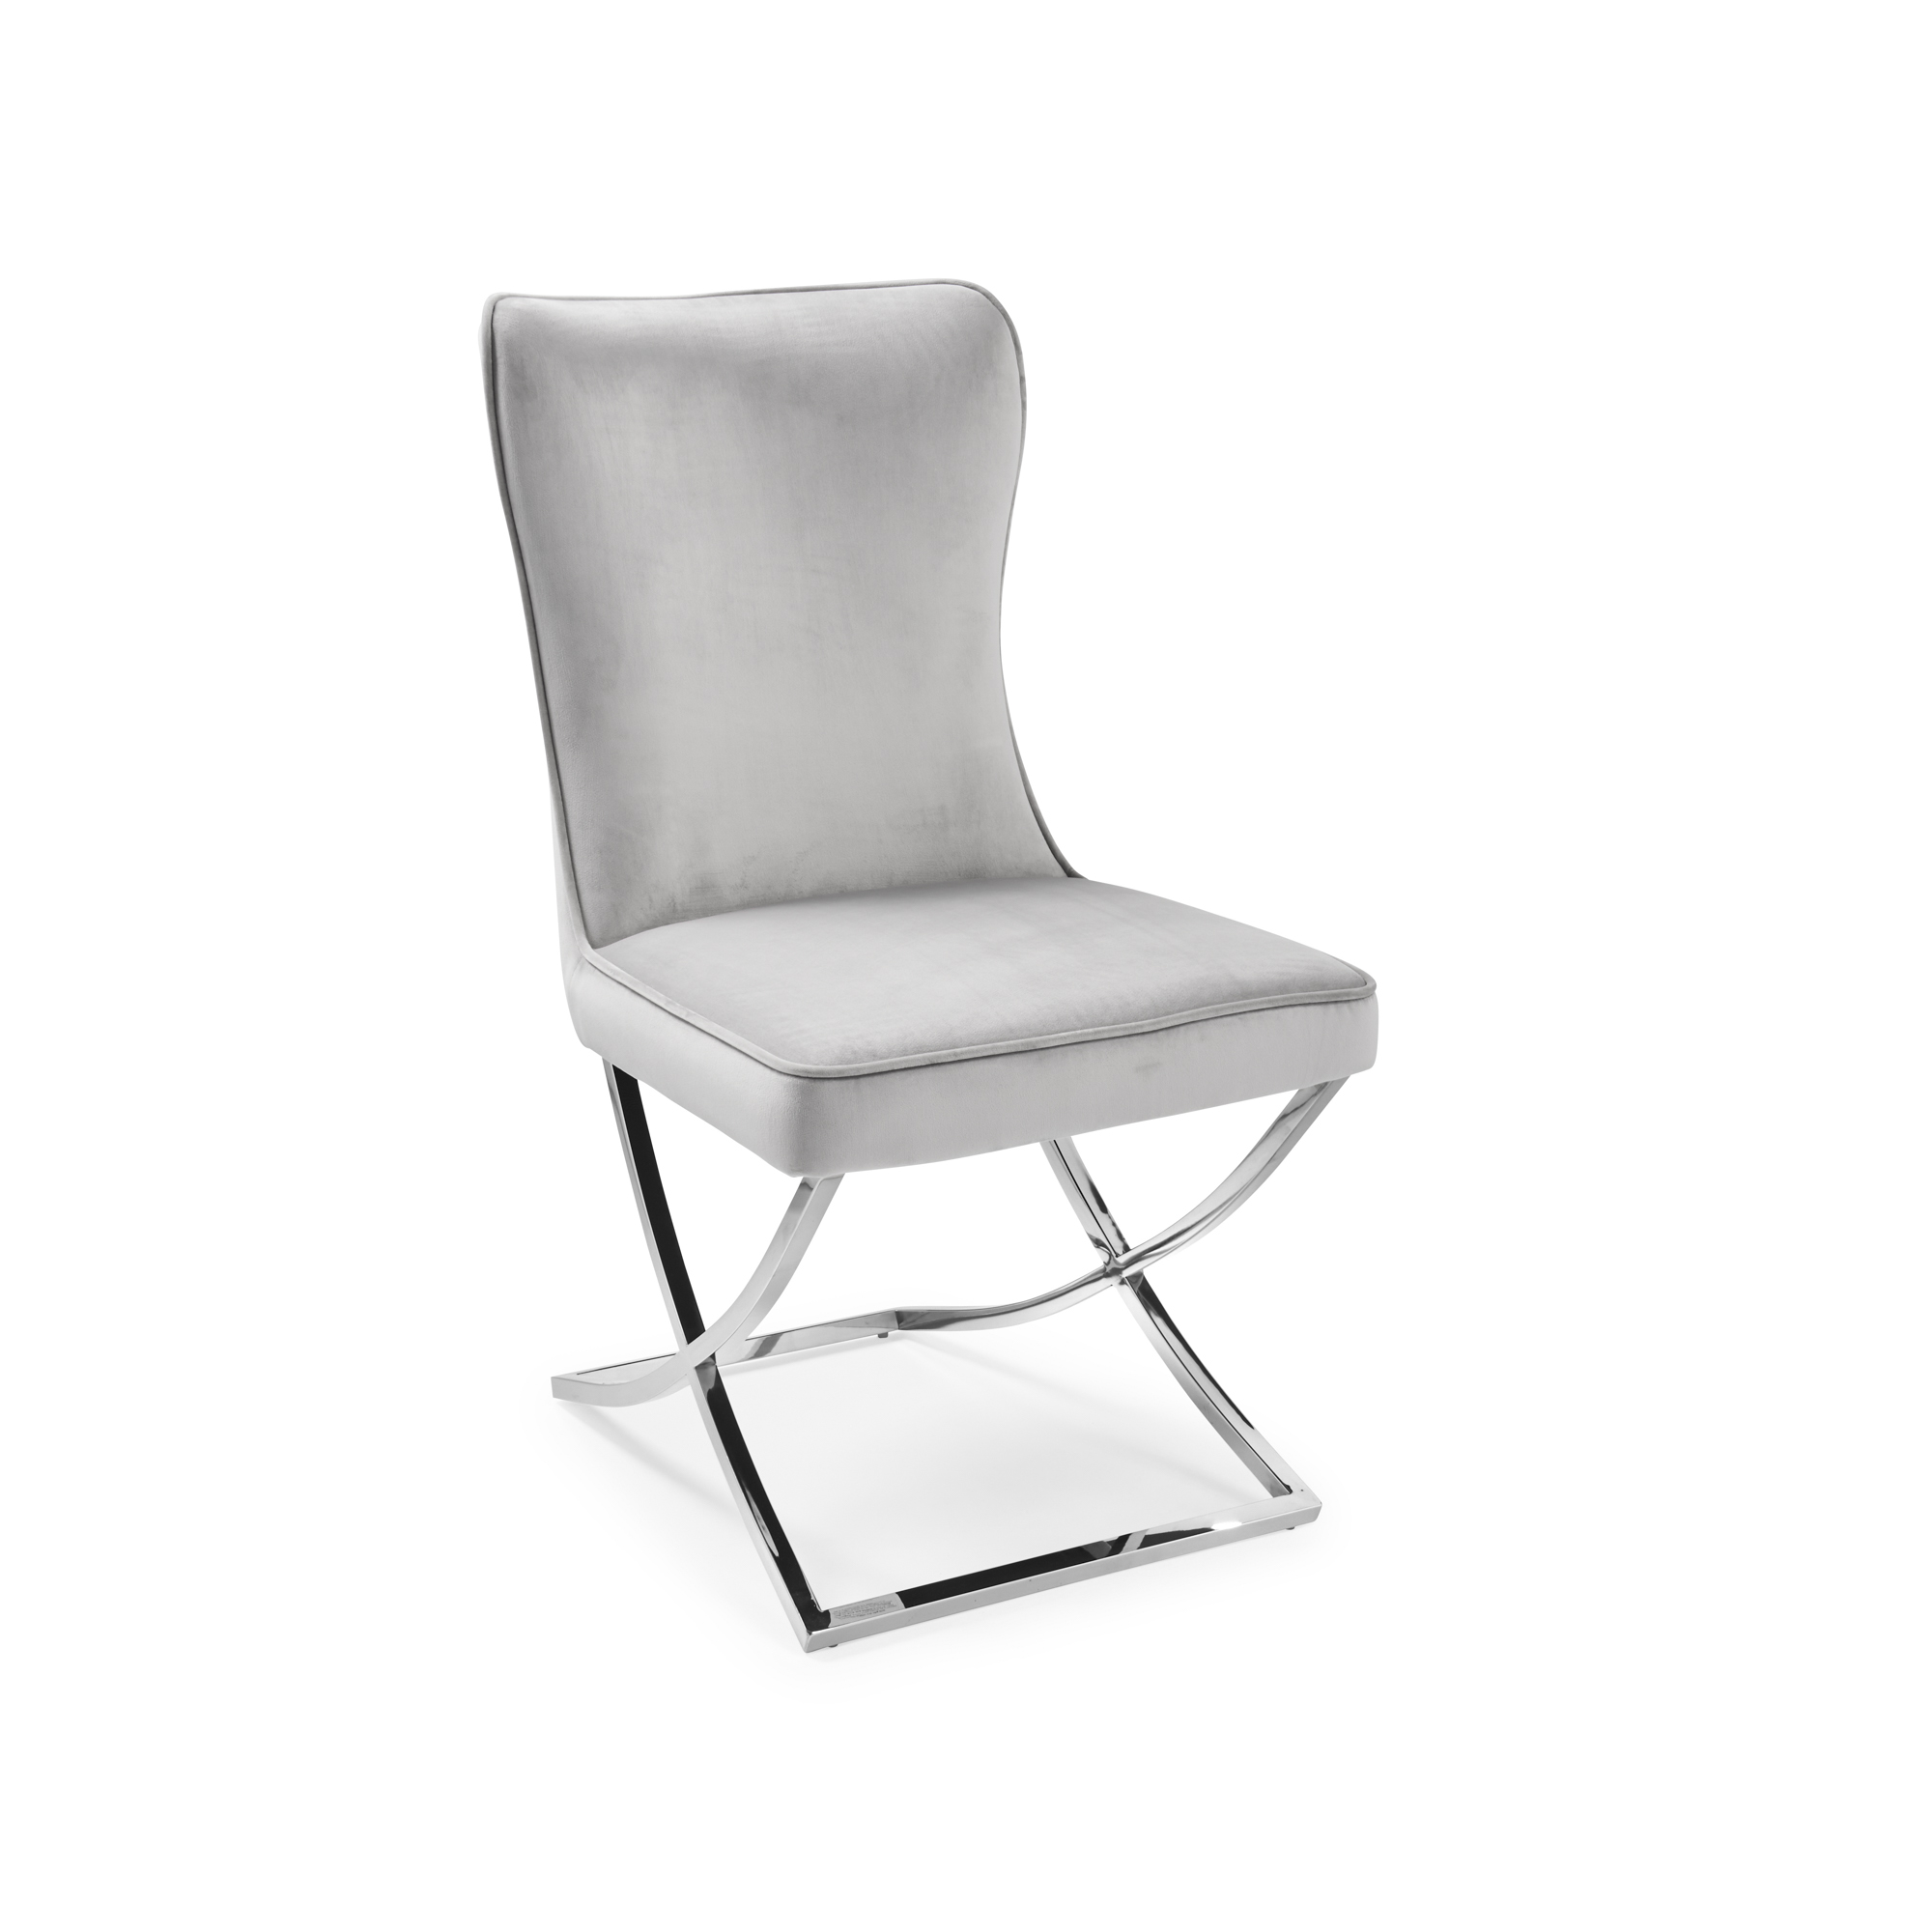 (Set of 2) Cheshire Light Grey Brushed Velvet Dining Chair with a Stainless Steel Cross Leg